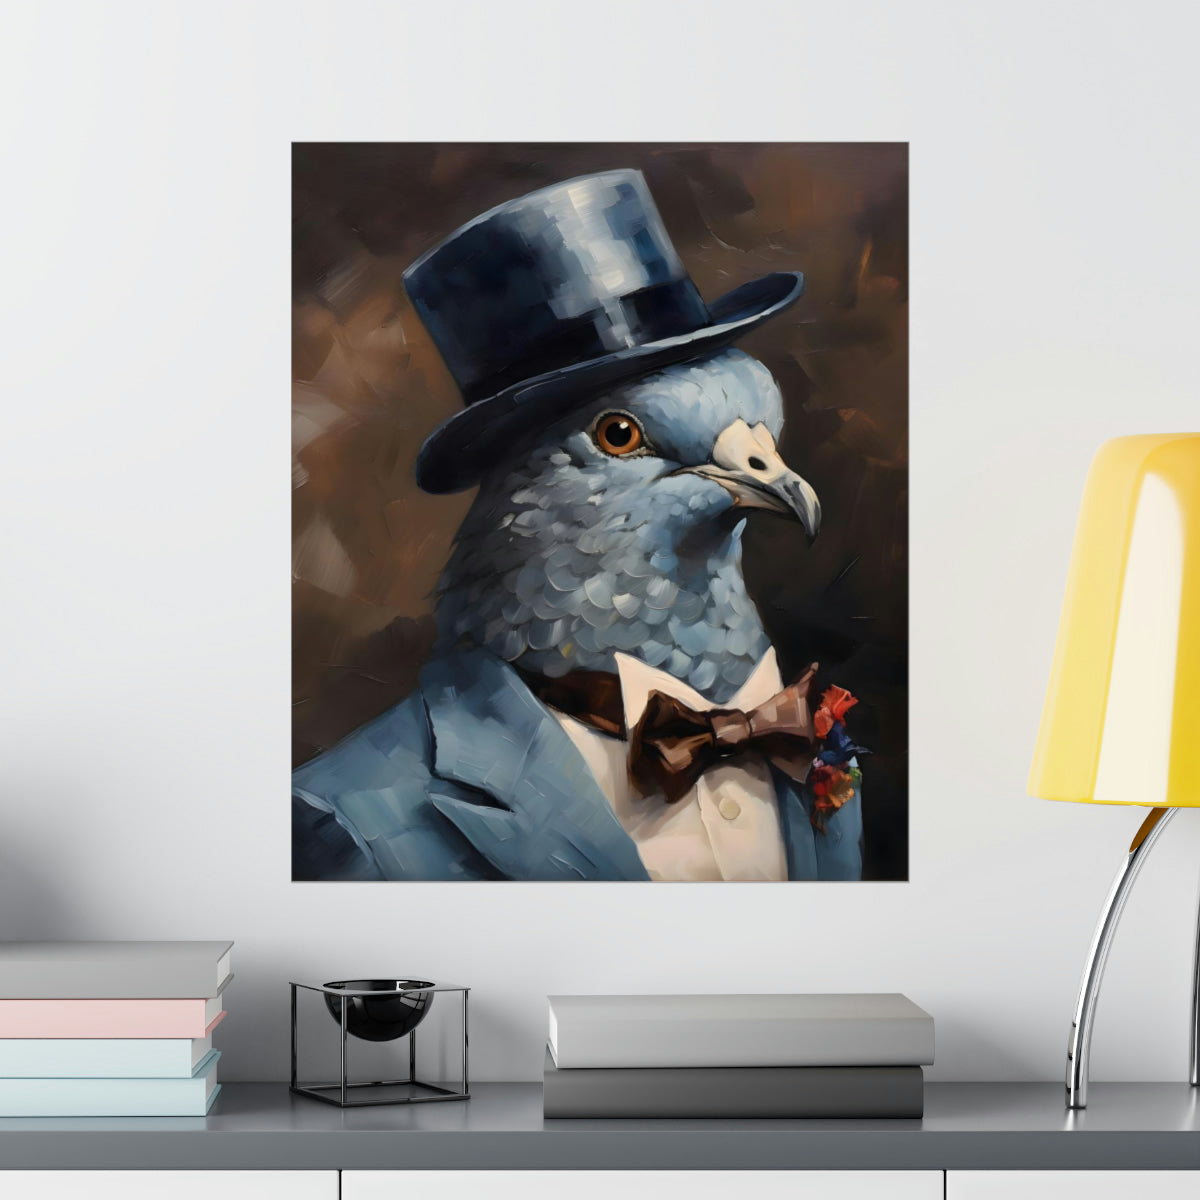 poster of a dapper pigeon wearing a suit, bowtie and top hat